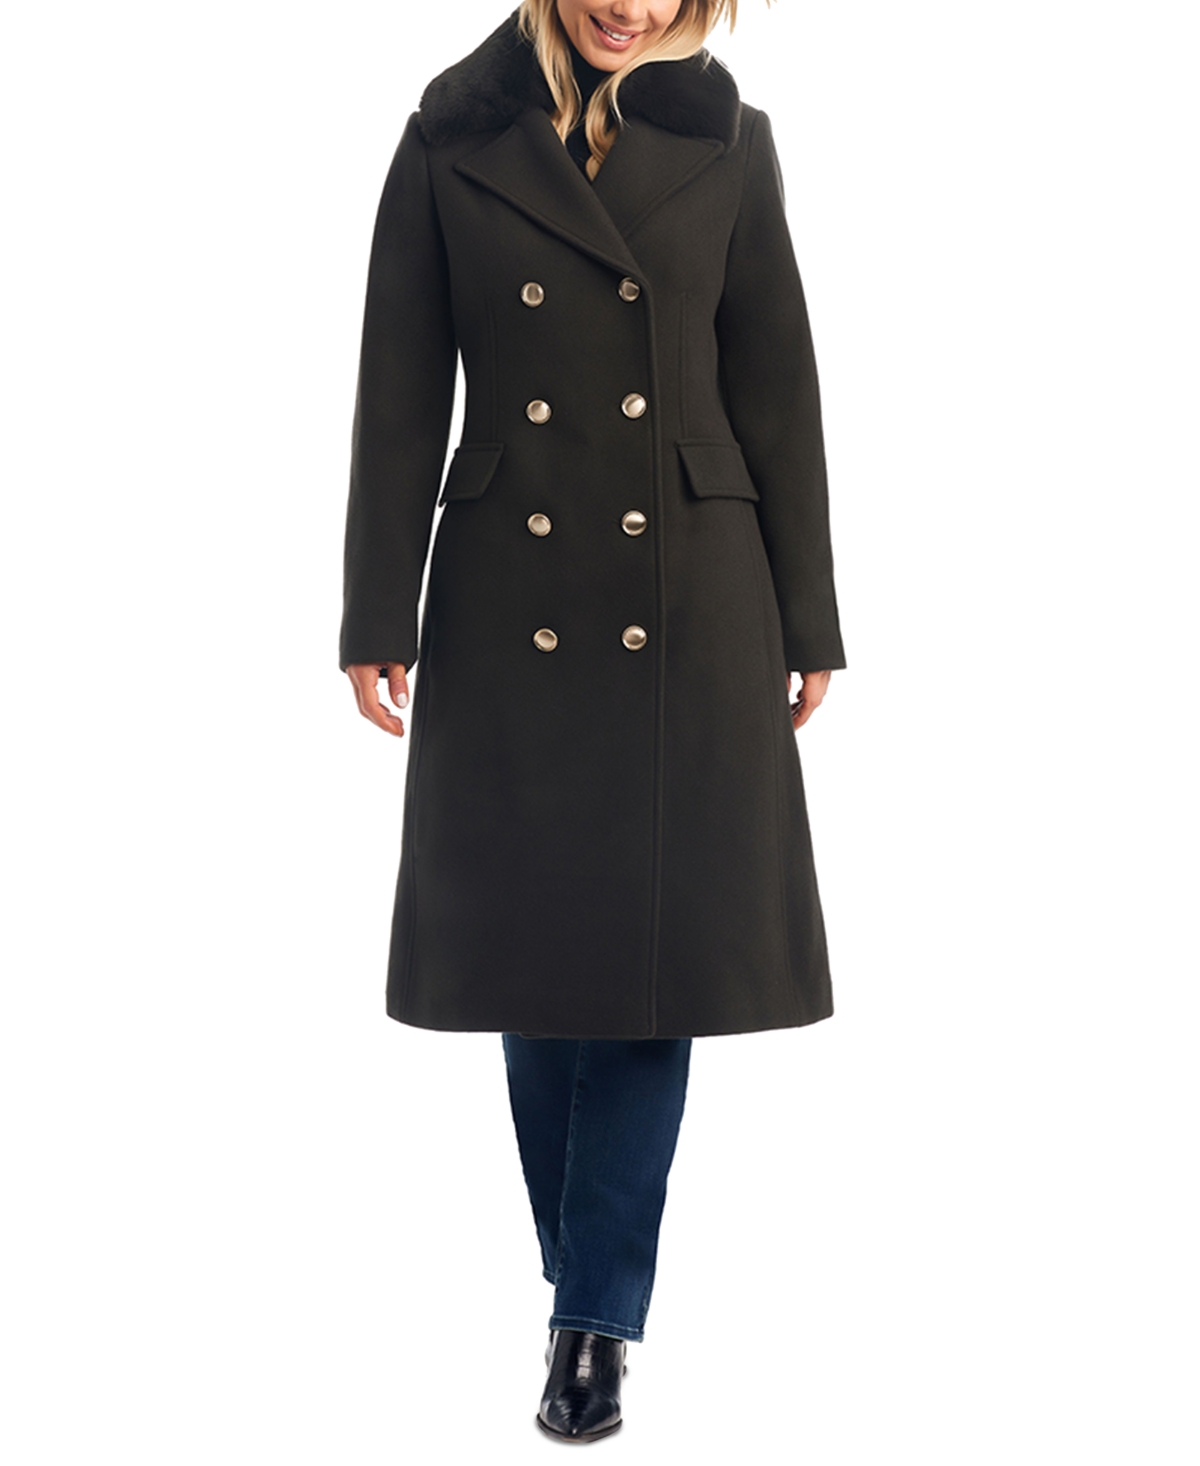 Women's Double-Breasted Faux-Fur-Collar Wool Blend Coat - Olive